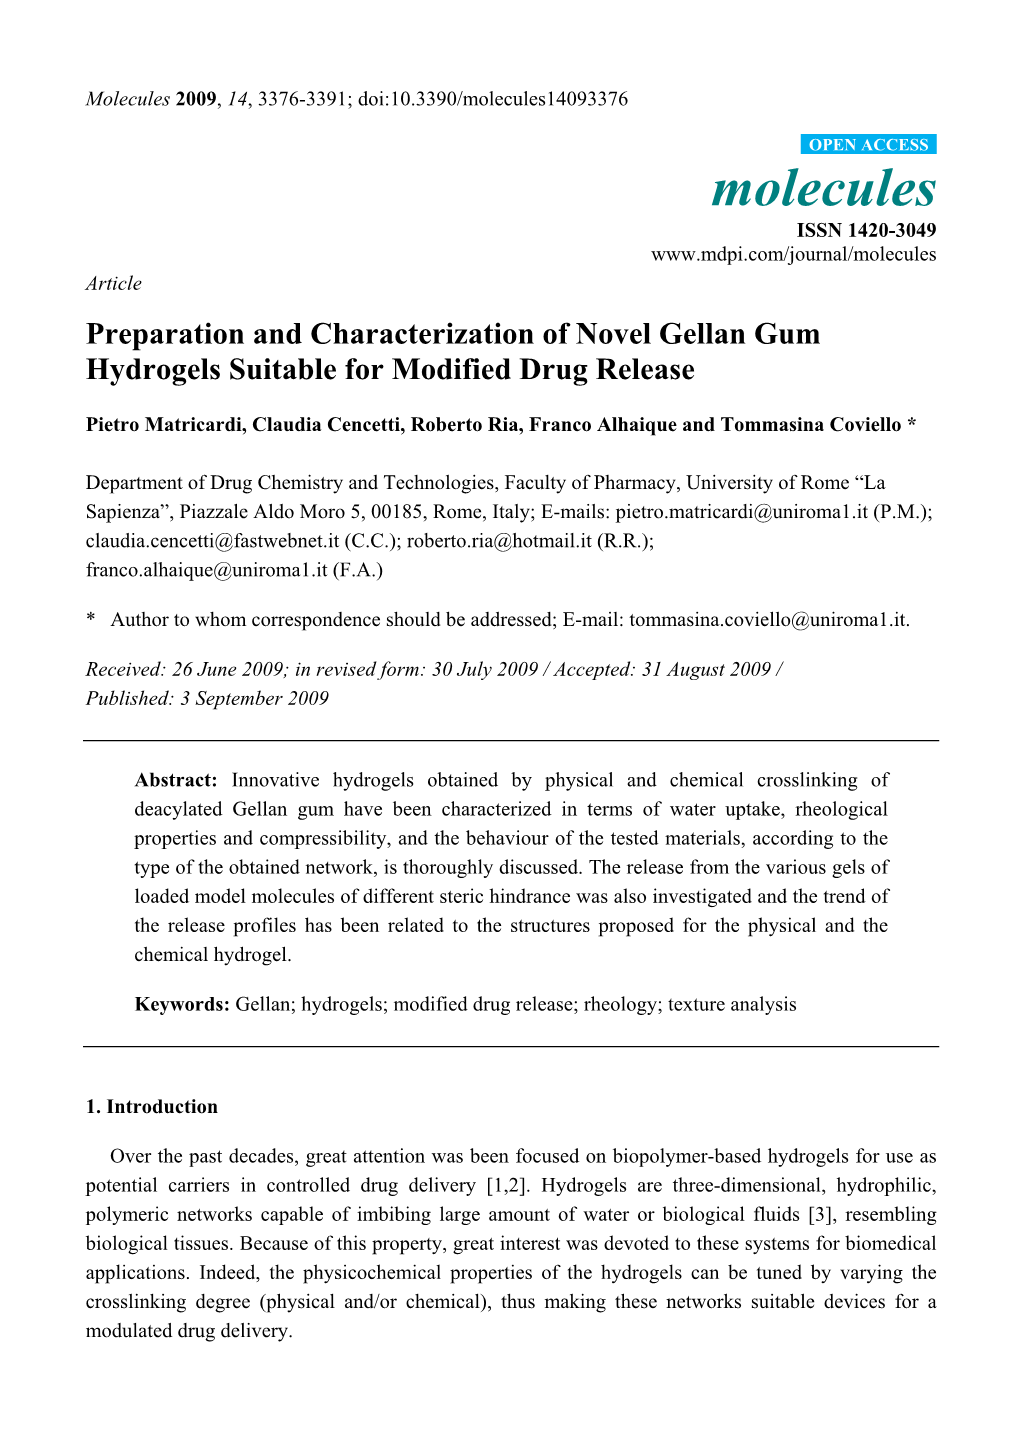 Preparation and Characterization of Novel Gellan Gum Hydrogels Suitable for Modified Drug Release